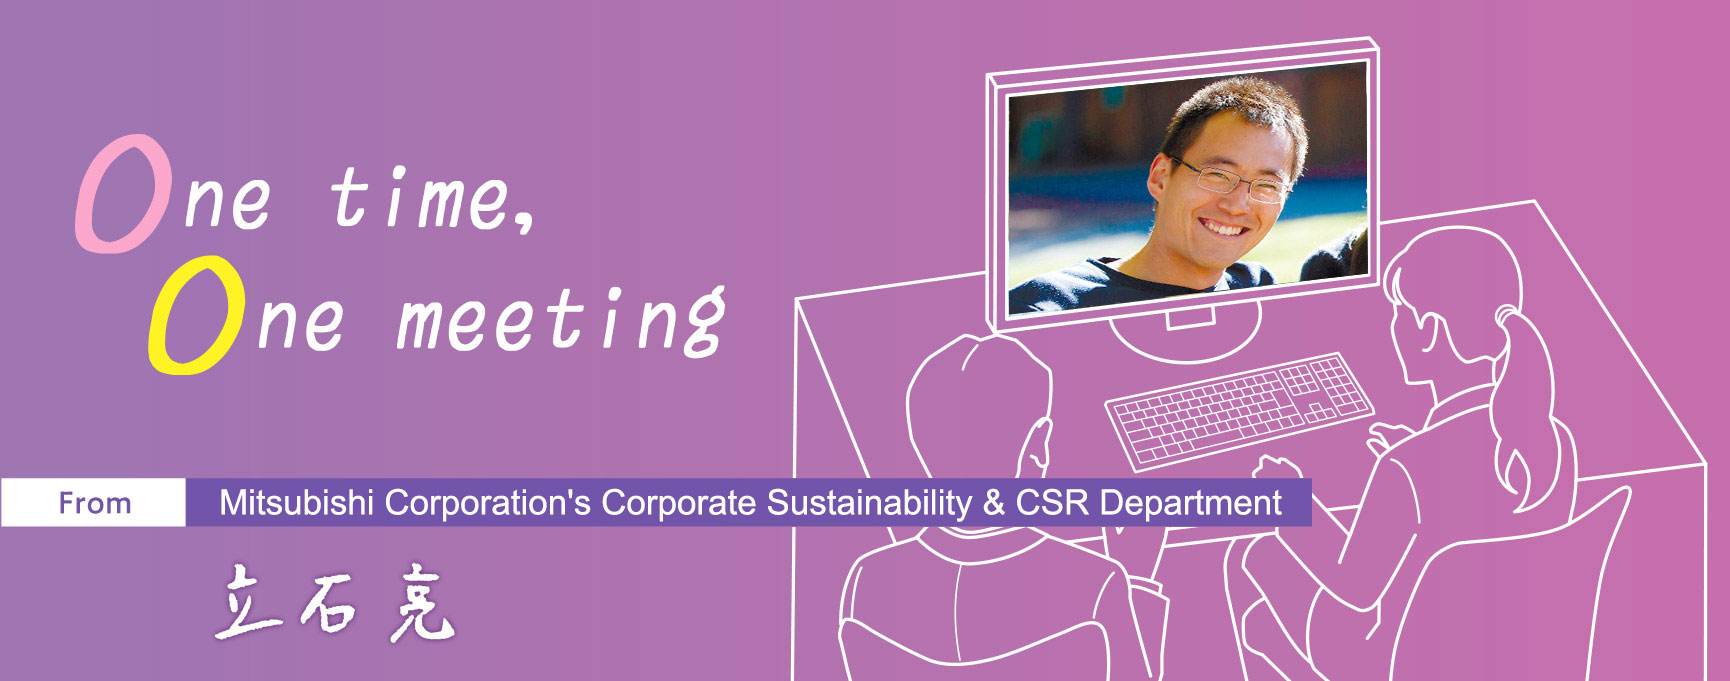 One time, One meeting From Mitsubishi Corporation's Corporate Sustainability & CSR Department Ryo Tateishi